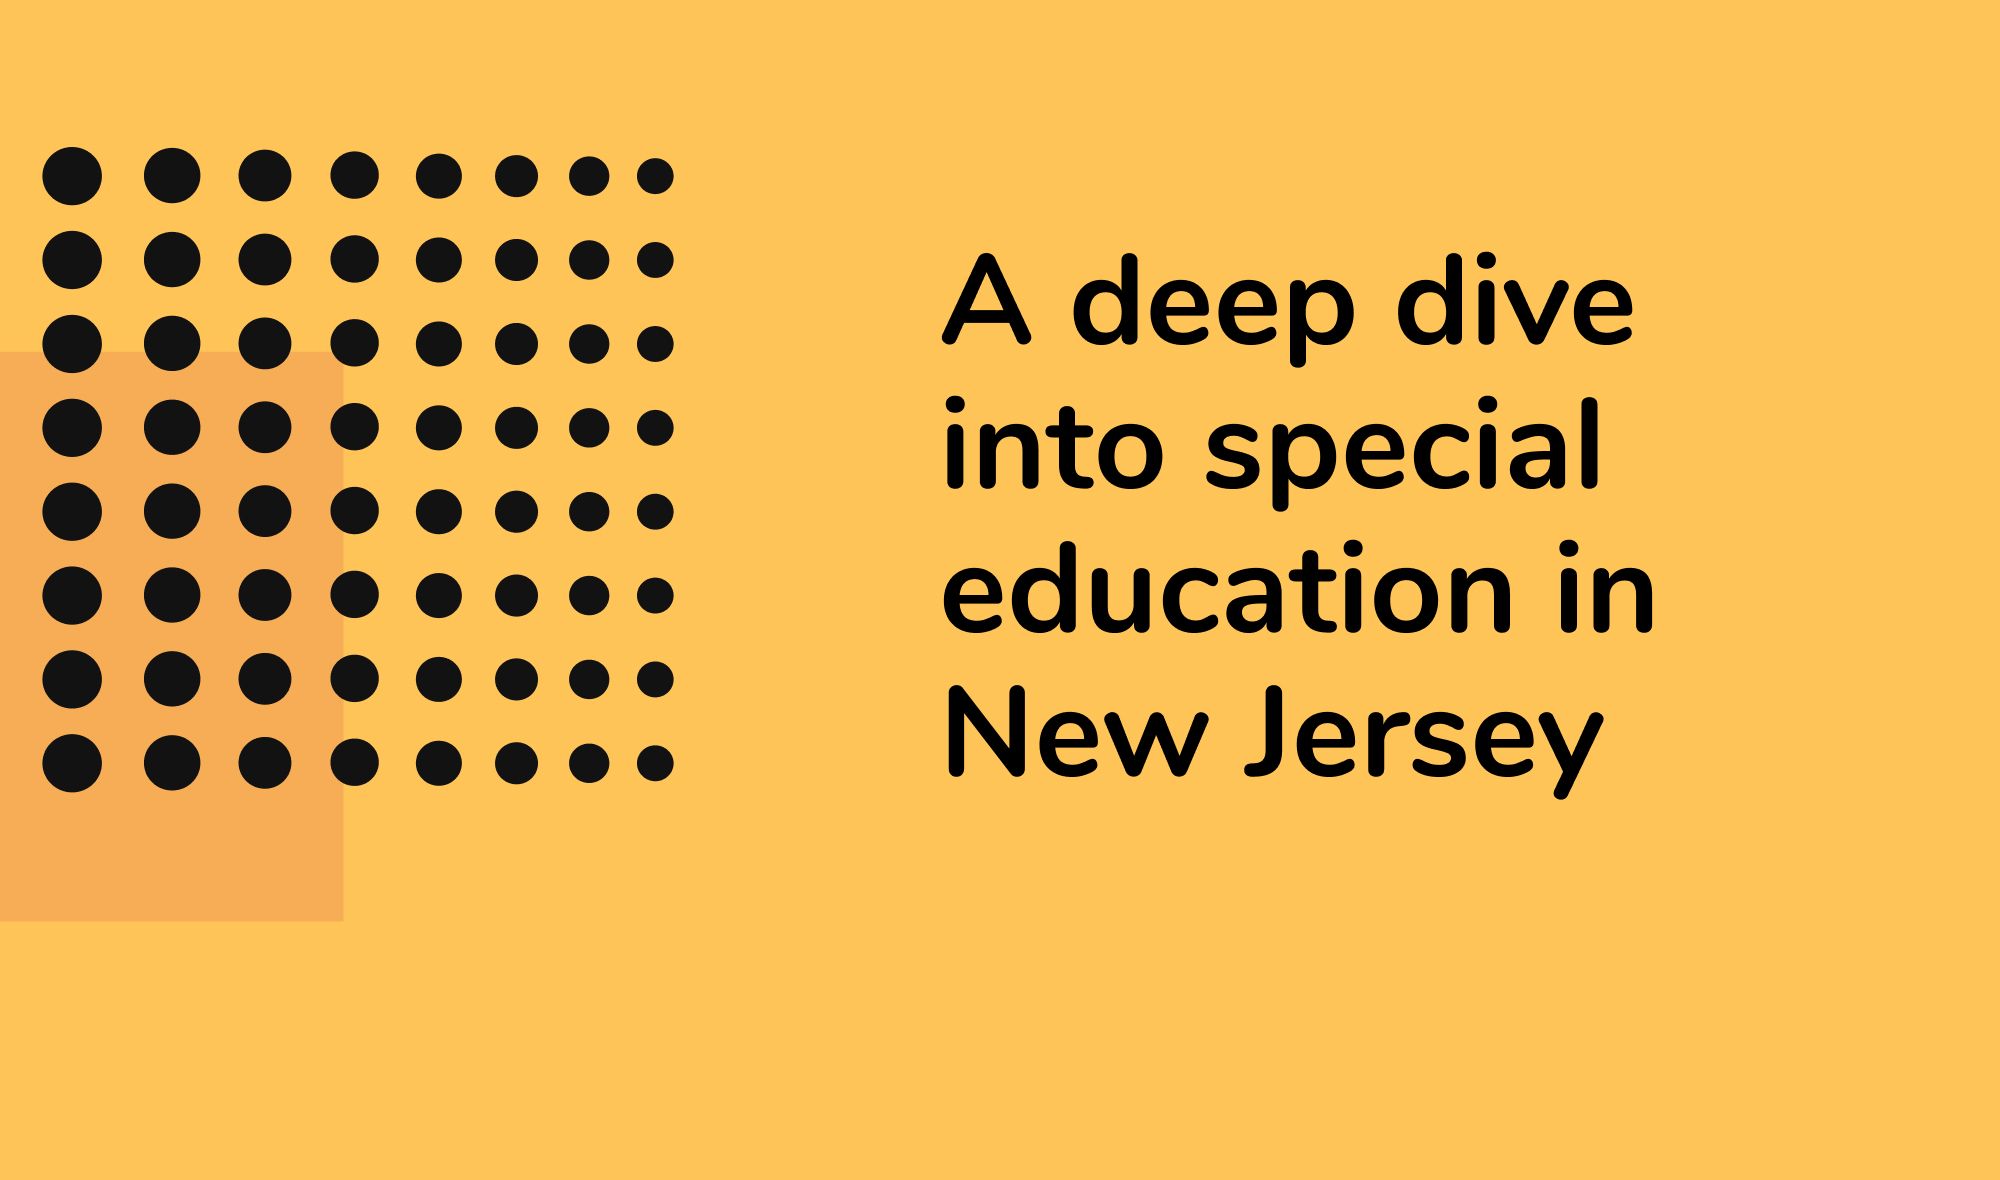 A deep dive into special education in New Jersey